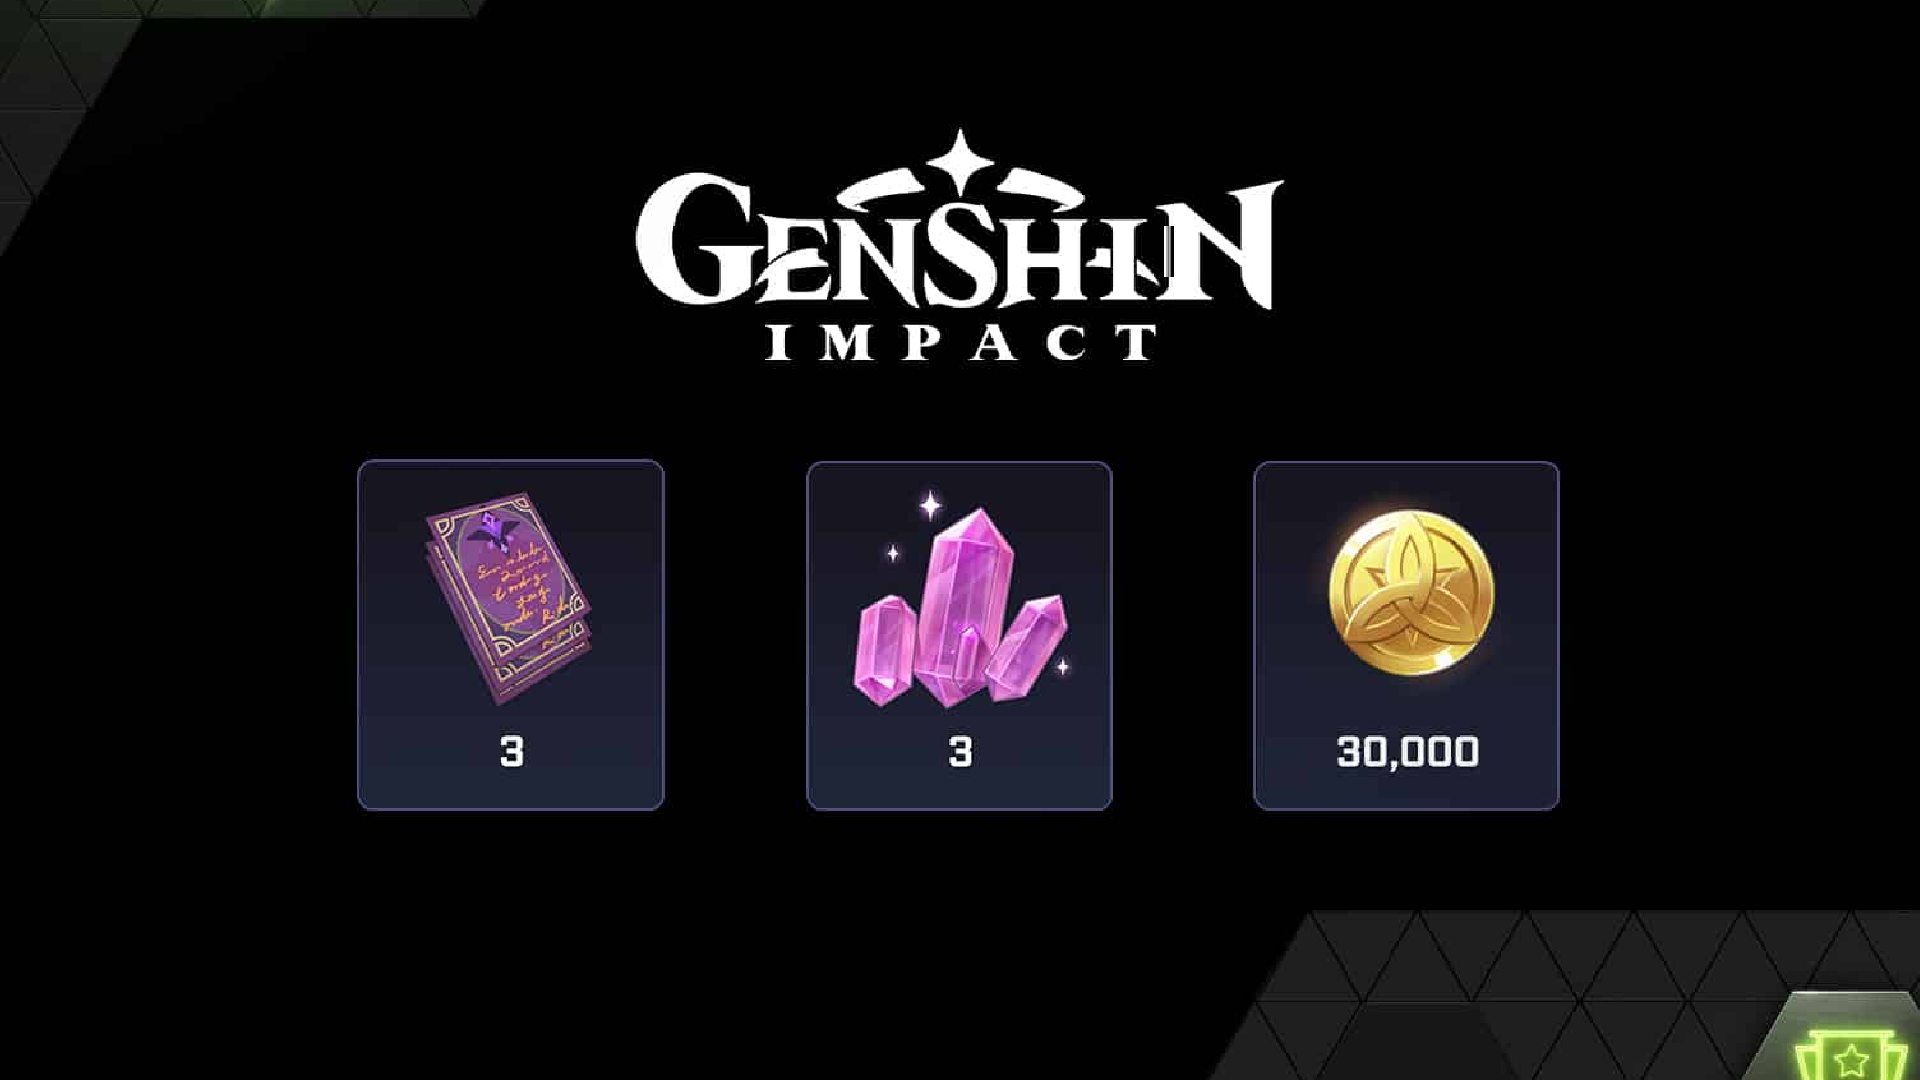 Nvidia GeForce Now Genshin Impact rewards image with Mora, Ore, and points emblems